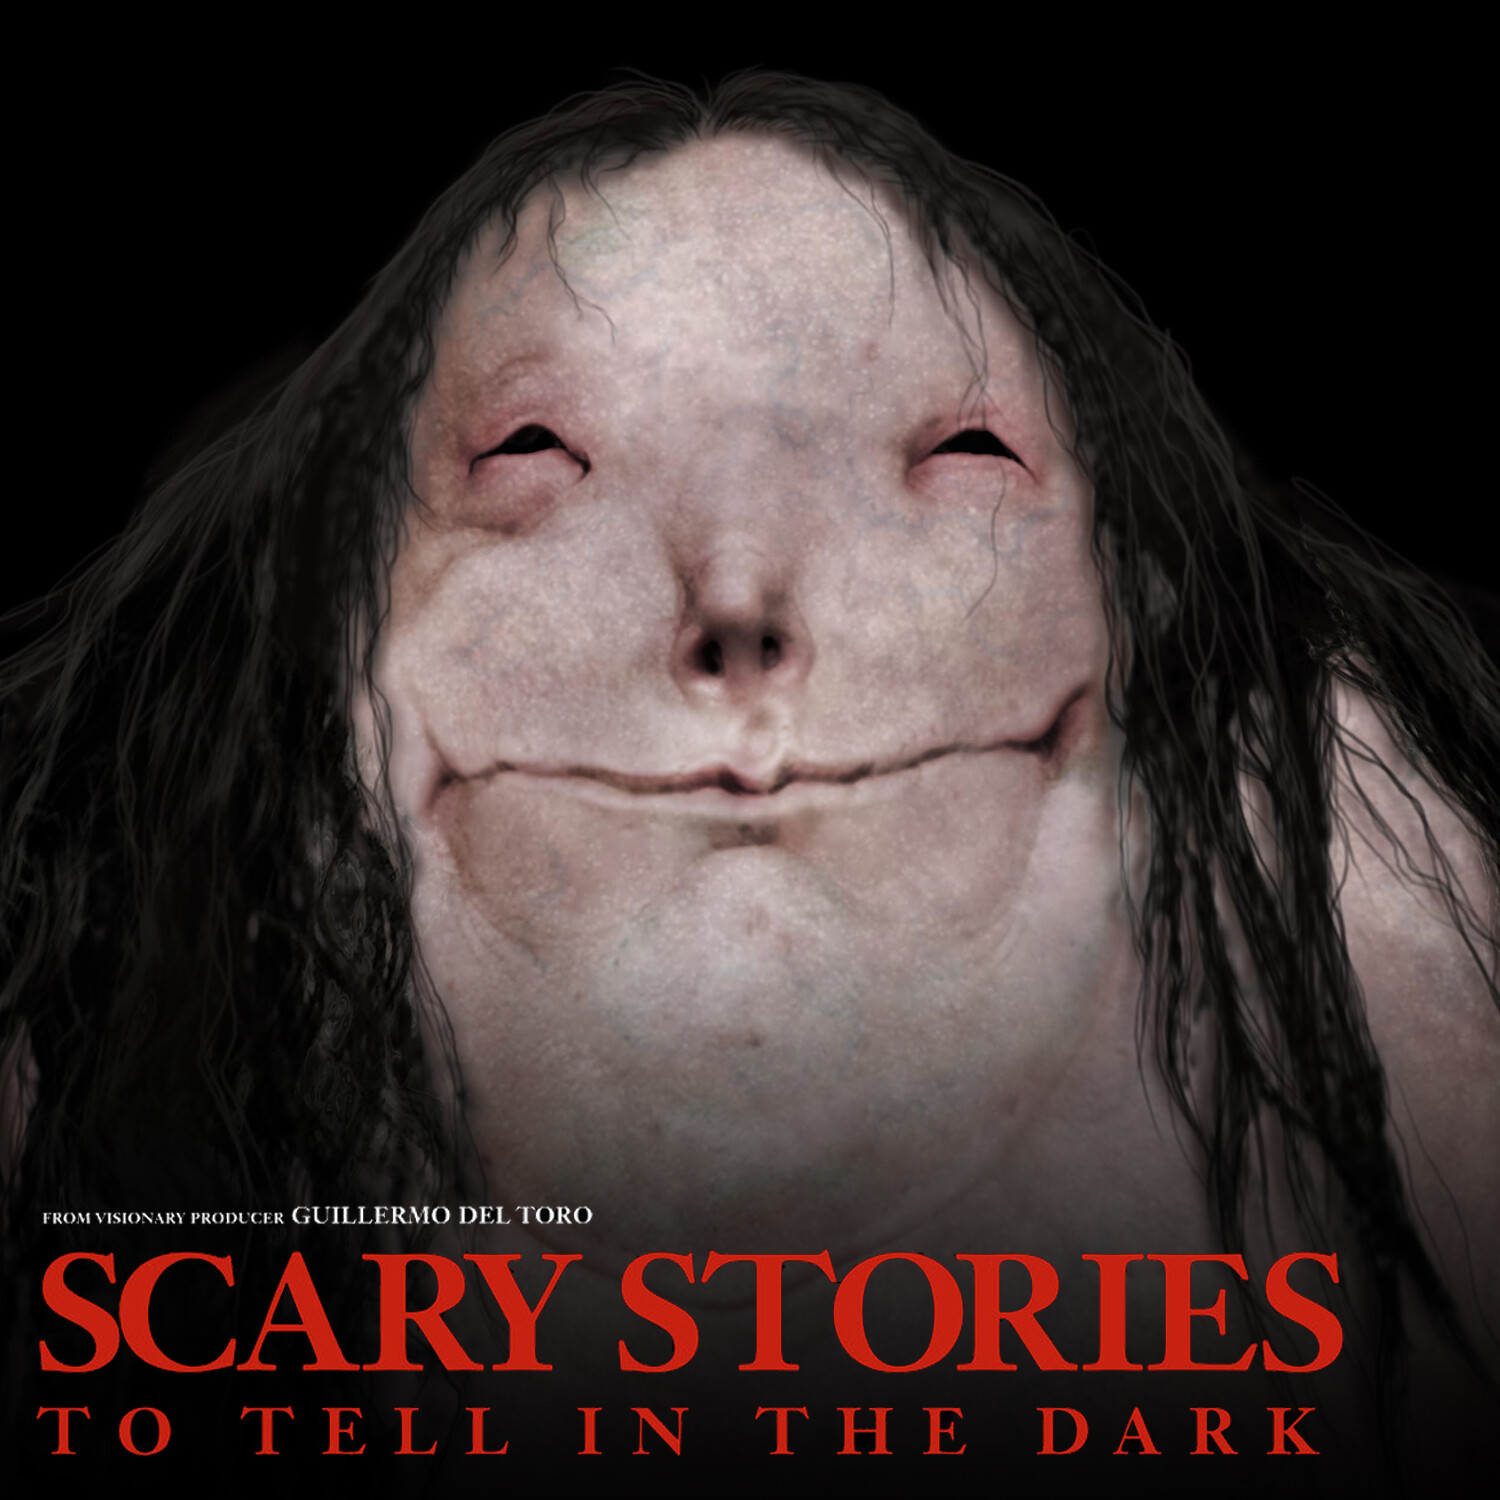 The Pale Lady is here in new Scary Stories to Tell in the Dark poster